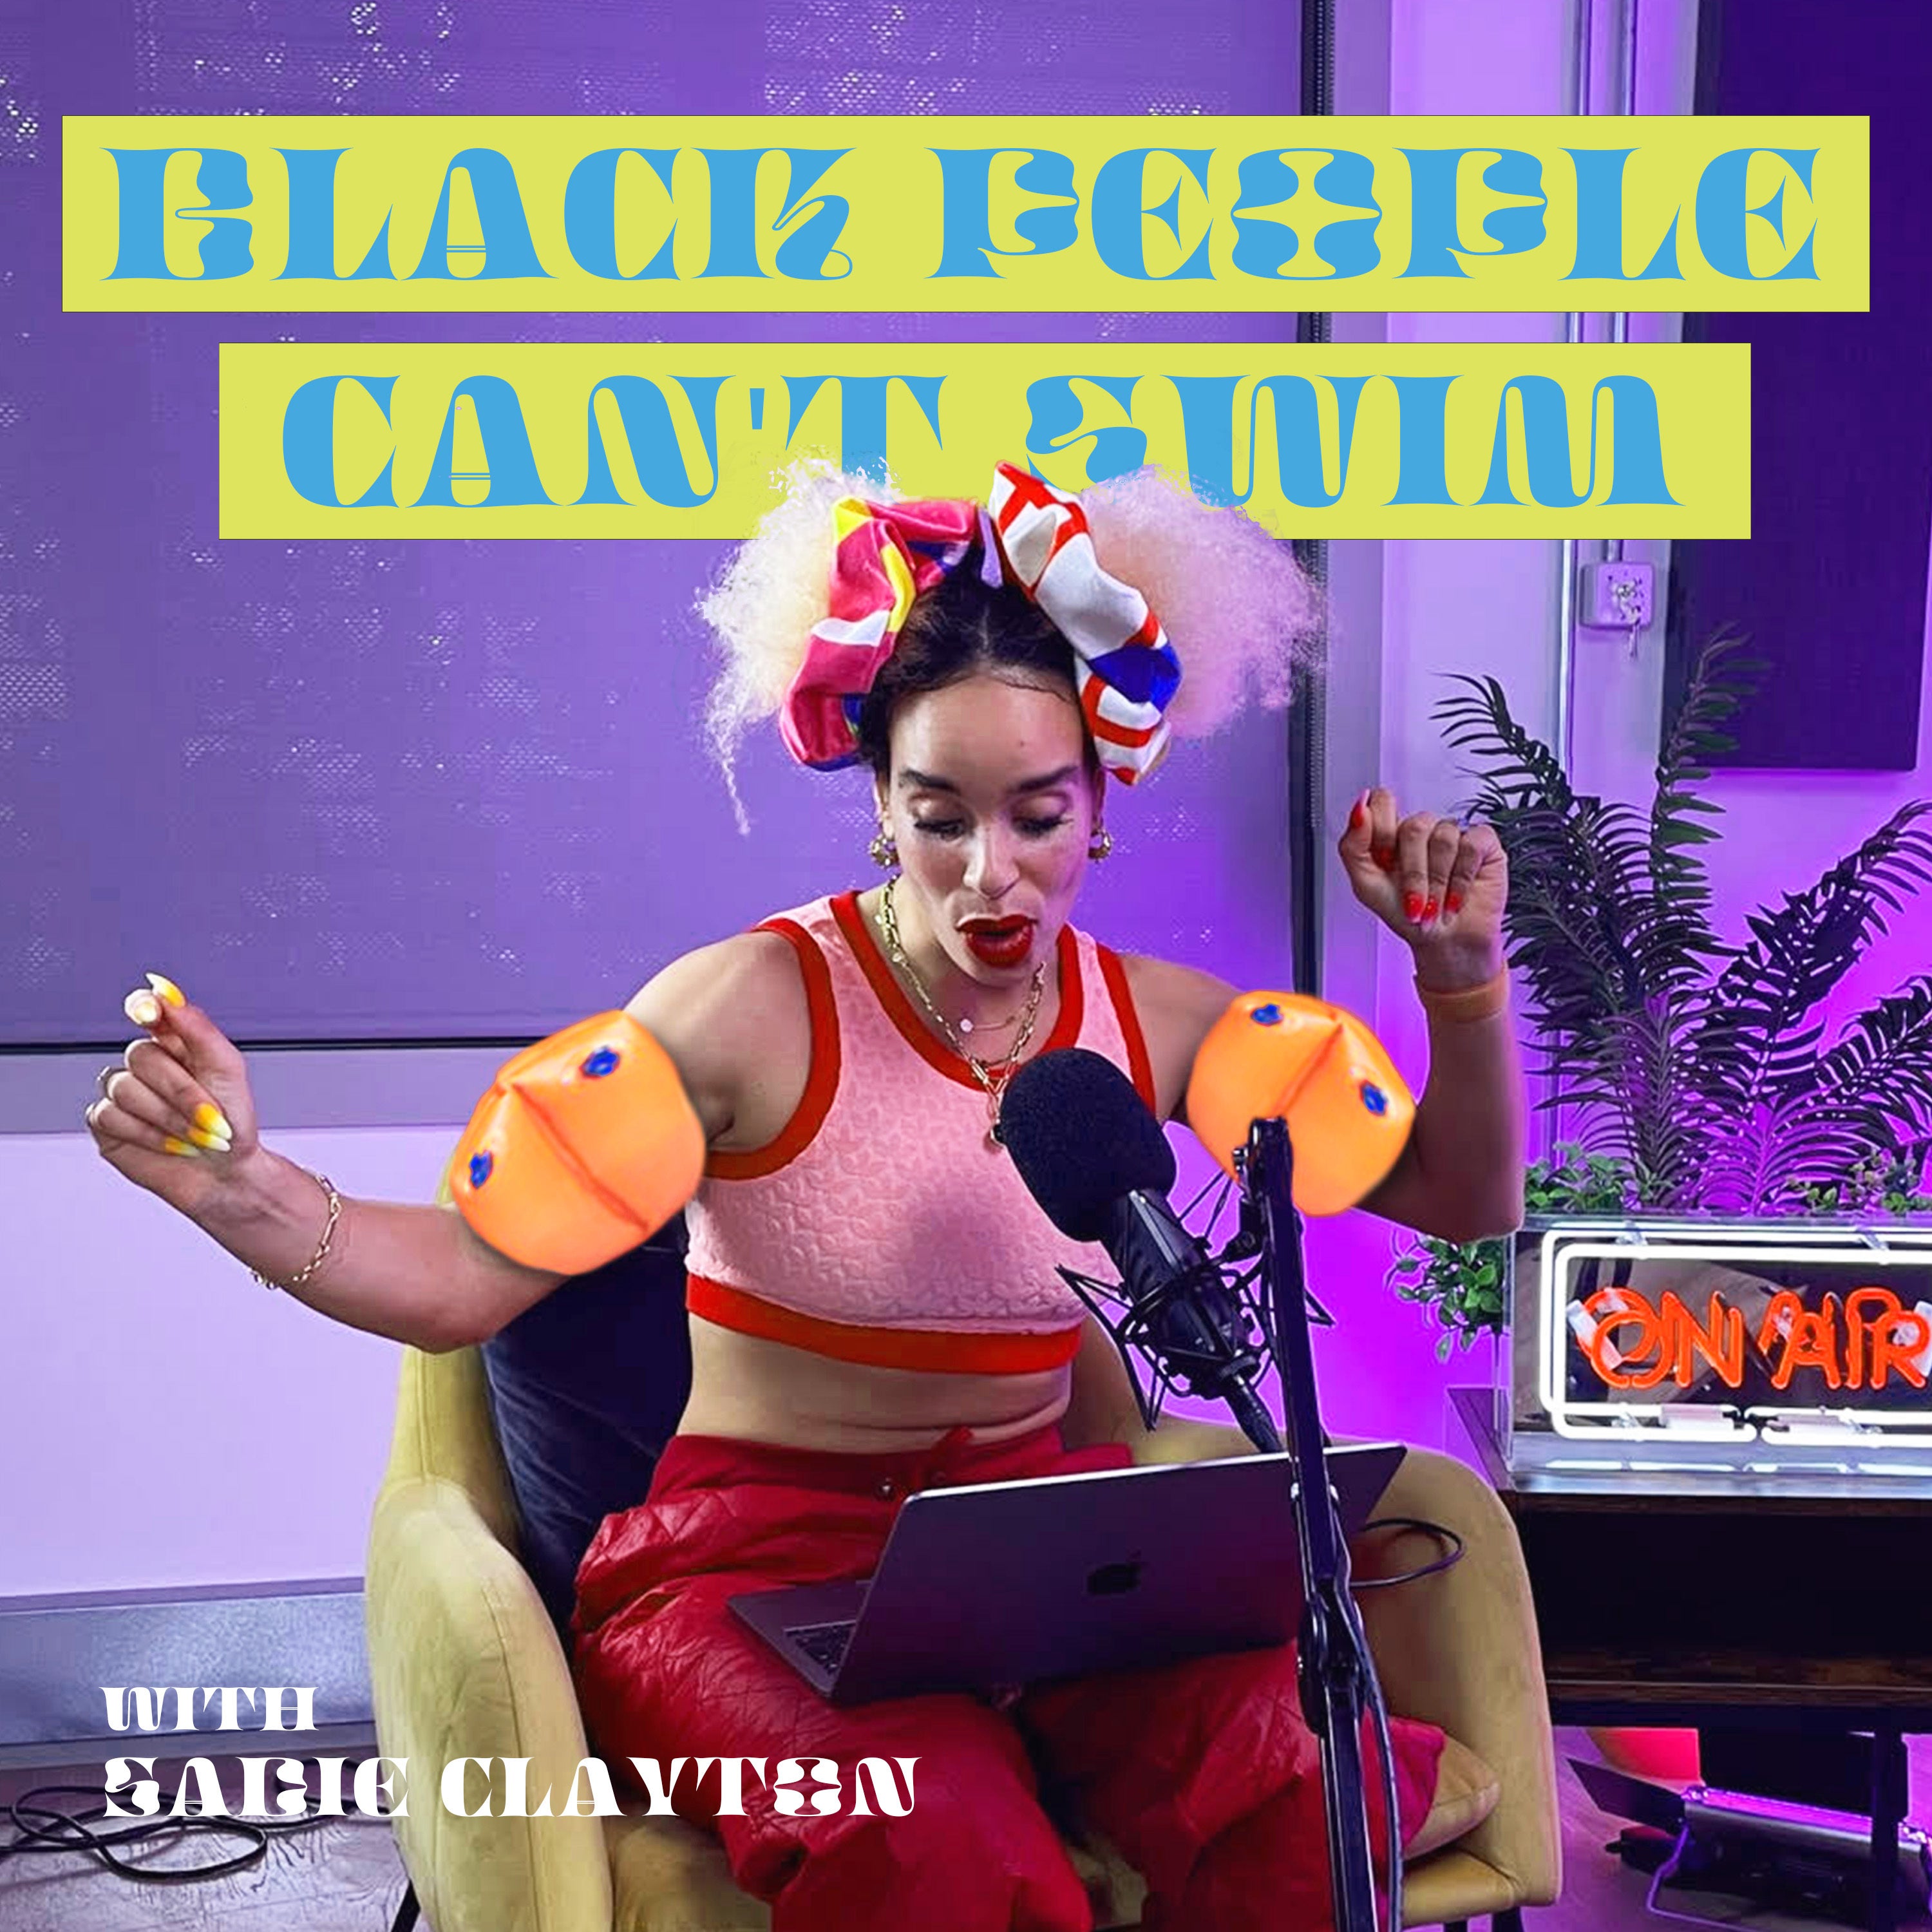 Sadie Clayton is the host of a new podcast, ‘Black People Can’t Swim’